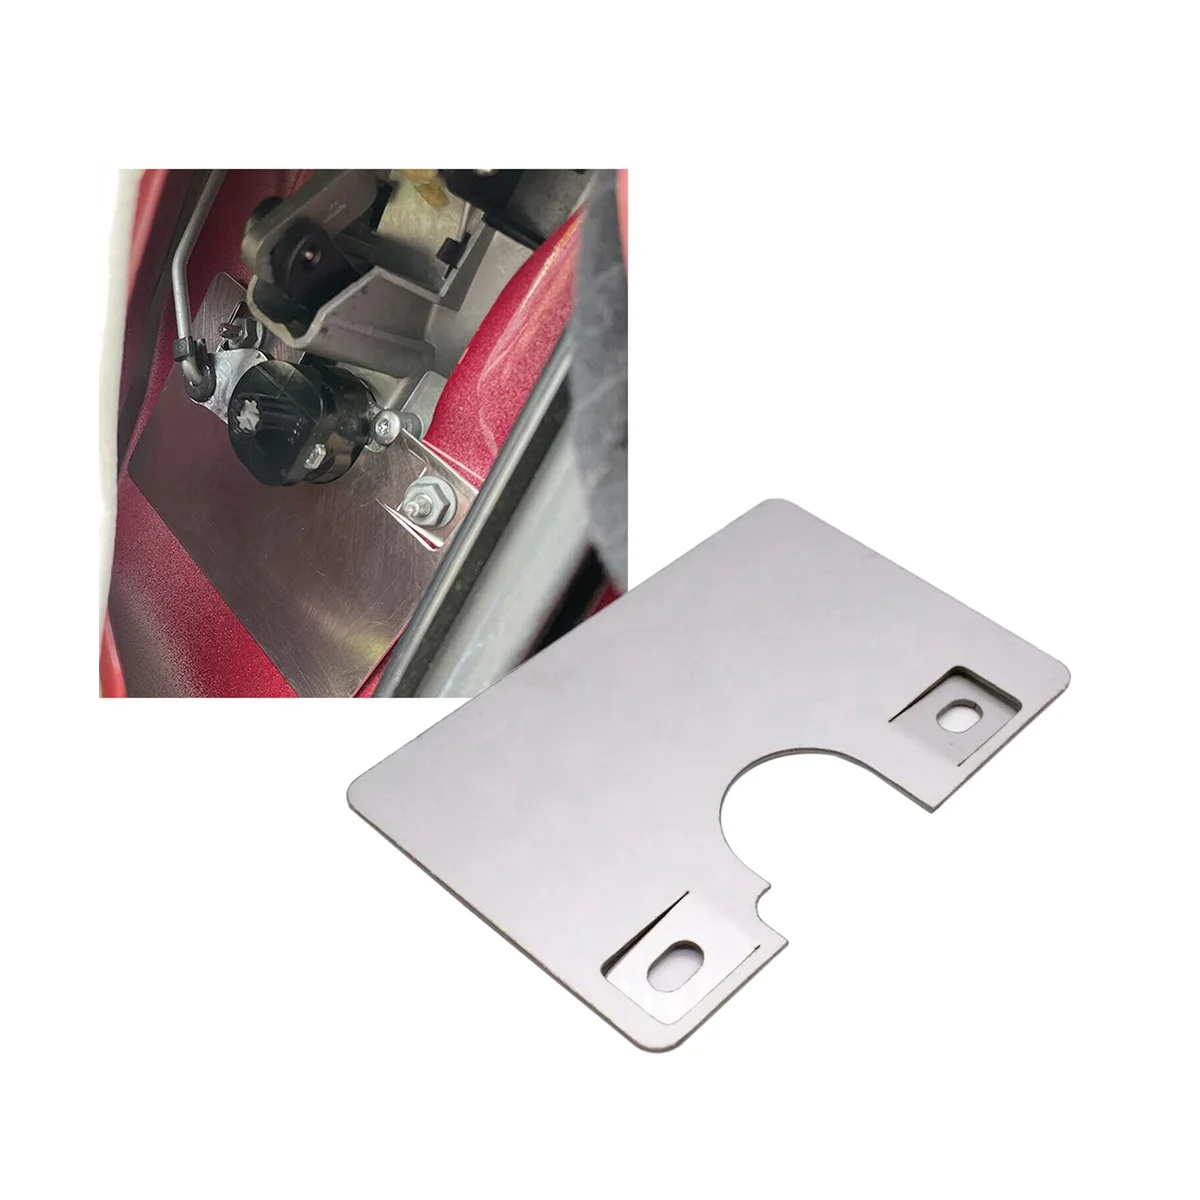 Burglary Protection Driver's Door Prick Stop for Ducato X250 X290 Jumper Boxer Fuse images - 6